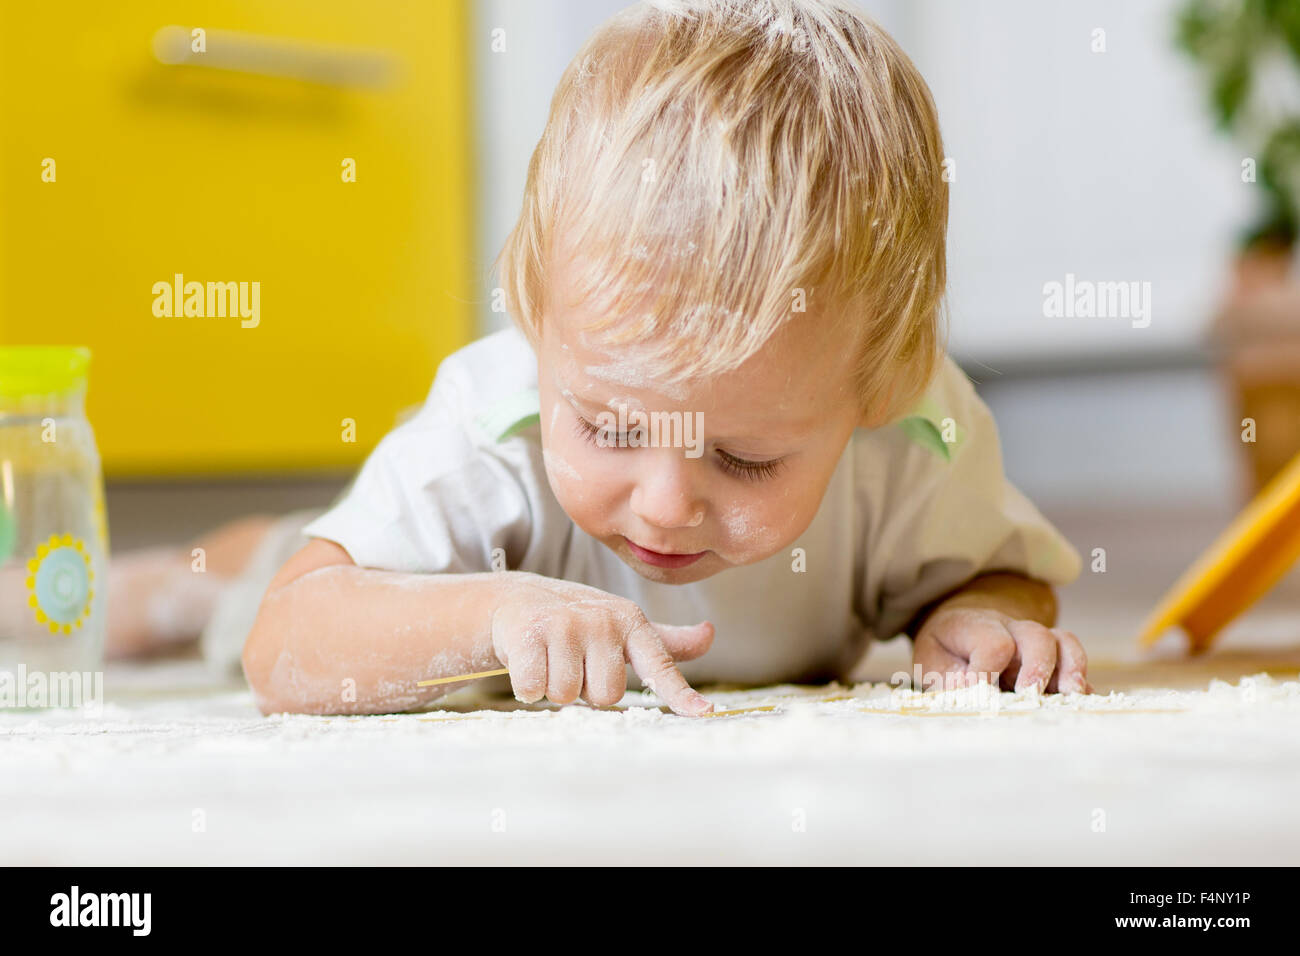 Little child laying on very messy kitchen floor, covered in white baking flour Stock Photo